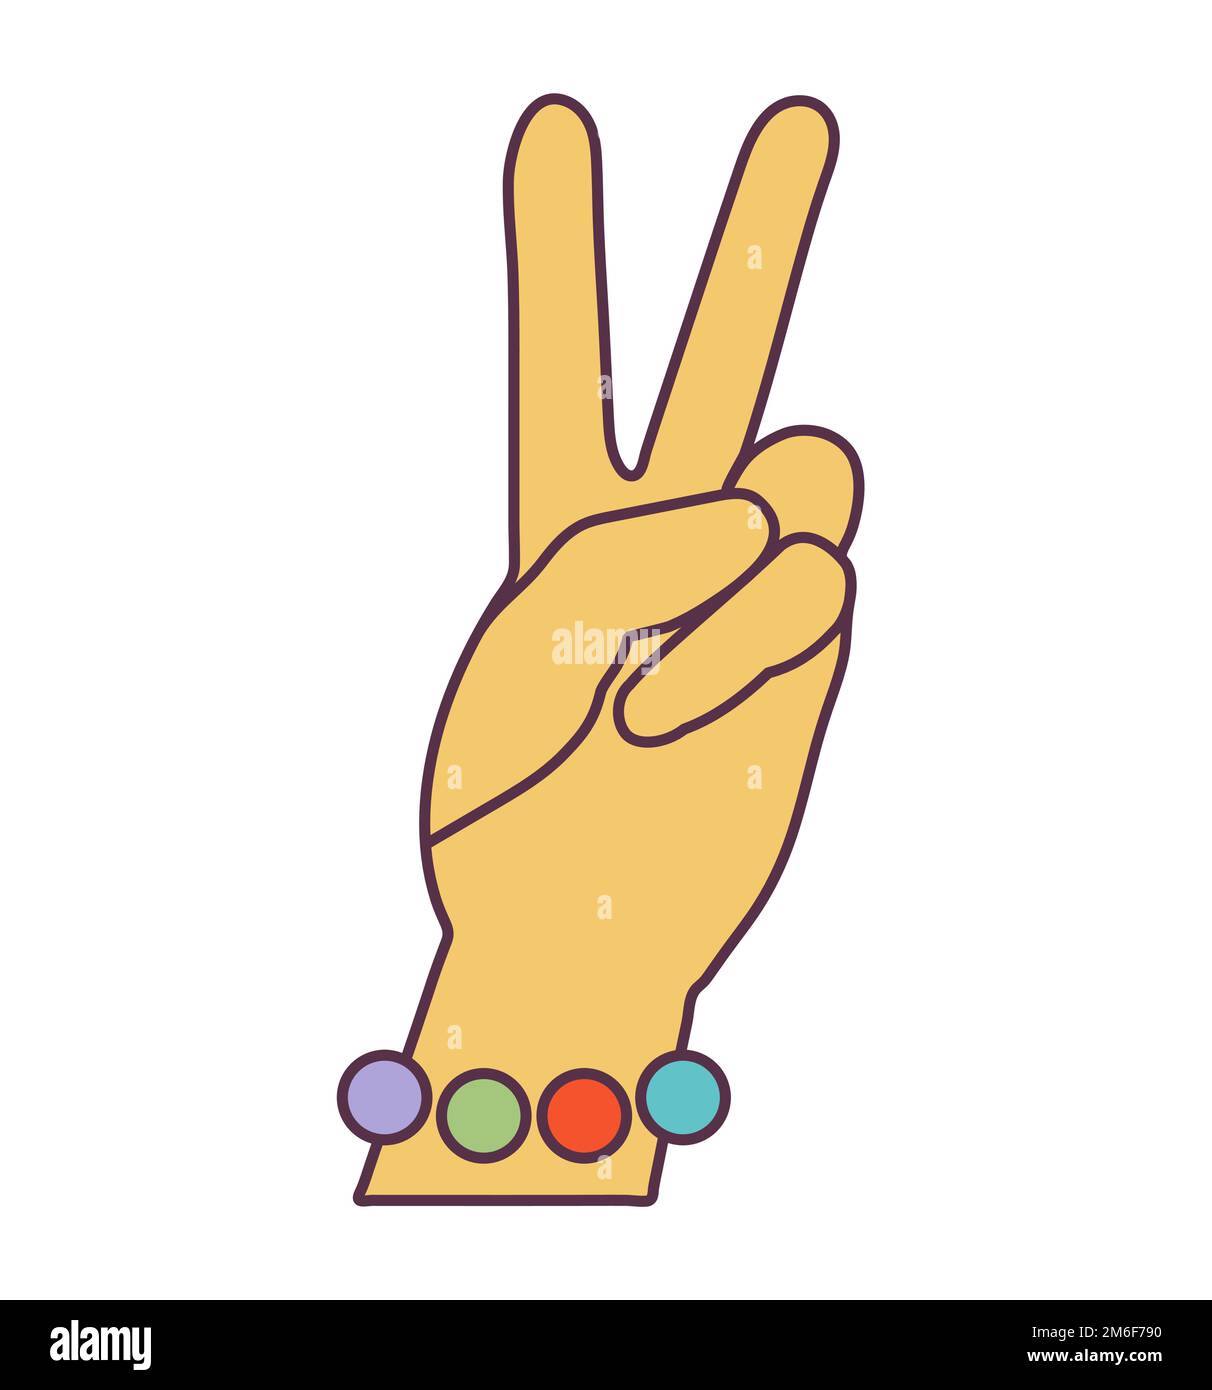 Retro 70s Groovy Hippie sticker hand peace symbol. Psychedelic cartoon element -funky illustration in vintage hippy style. Vector flat illustration Stock Vector